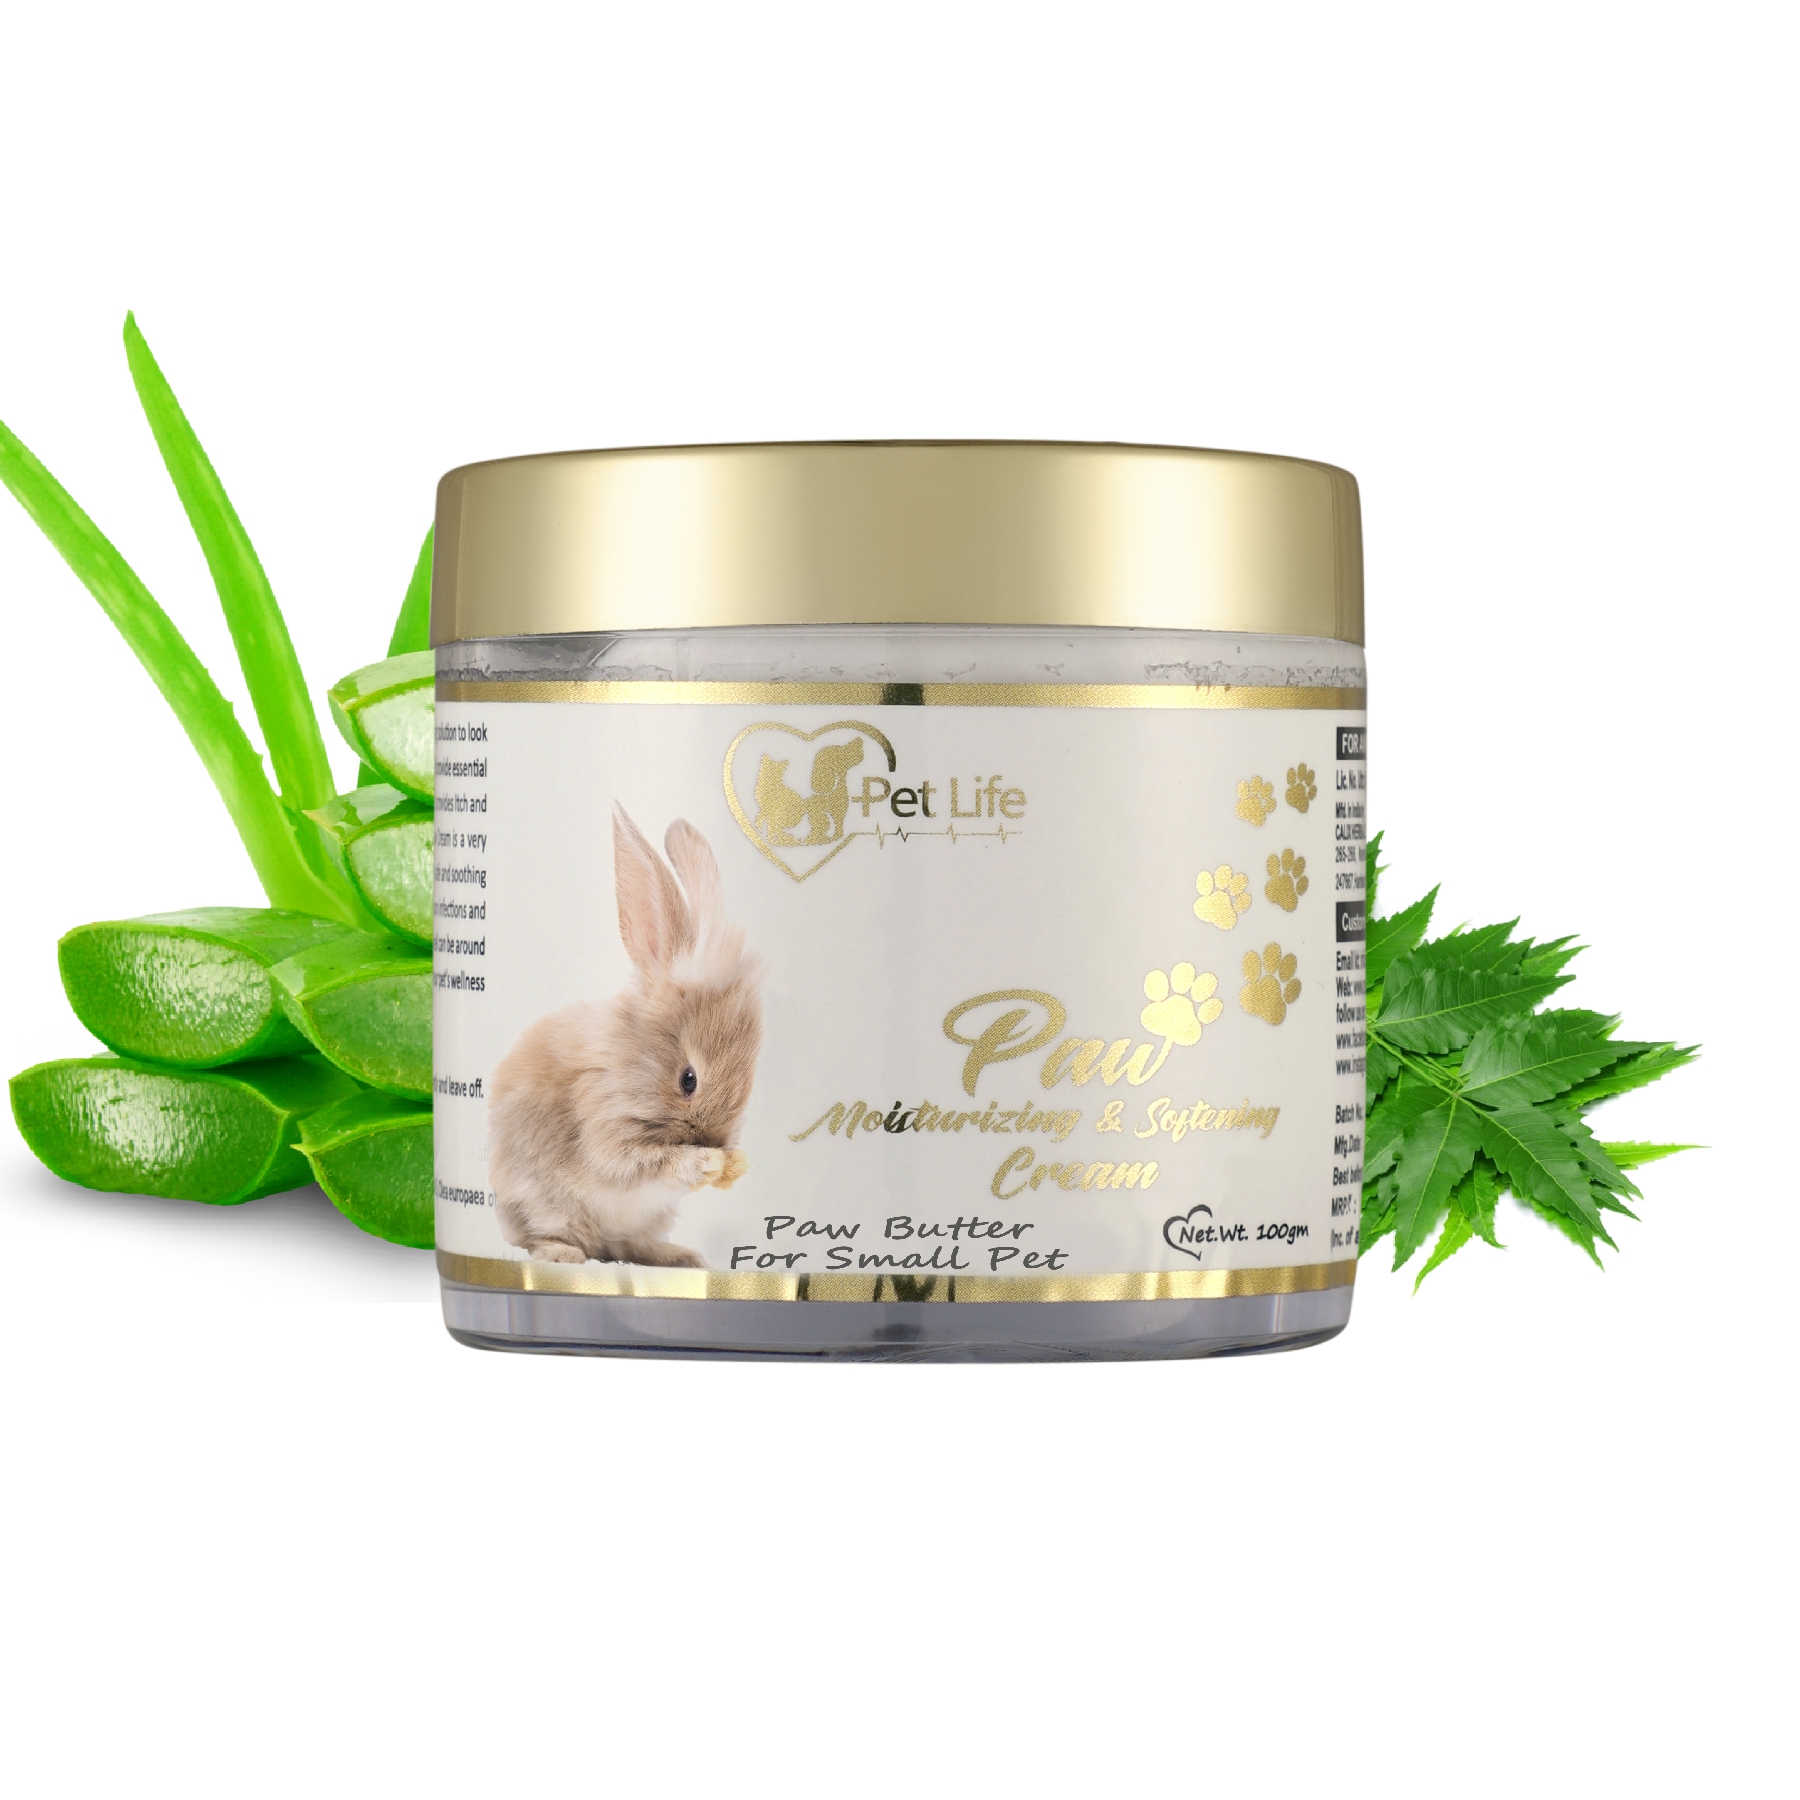 Pet Life Paw Moisturizing & Softening Cream for Small Pets, Rabbits & Kitten Cracked & Chapped Paws|Paw Butter Repair, Sooth & Heals Dry Paw & Elbow|Paw Butter Cream for All Small Pet Breed – 100 Gm